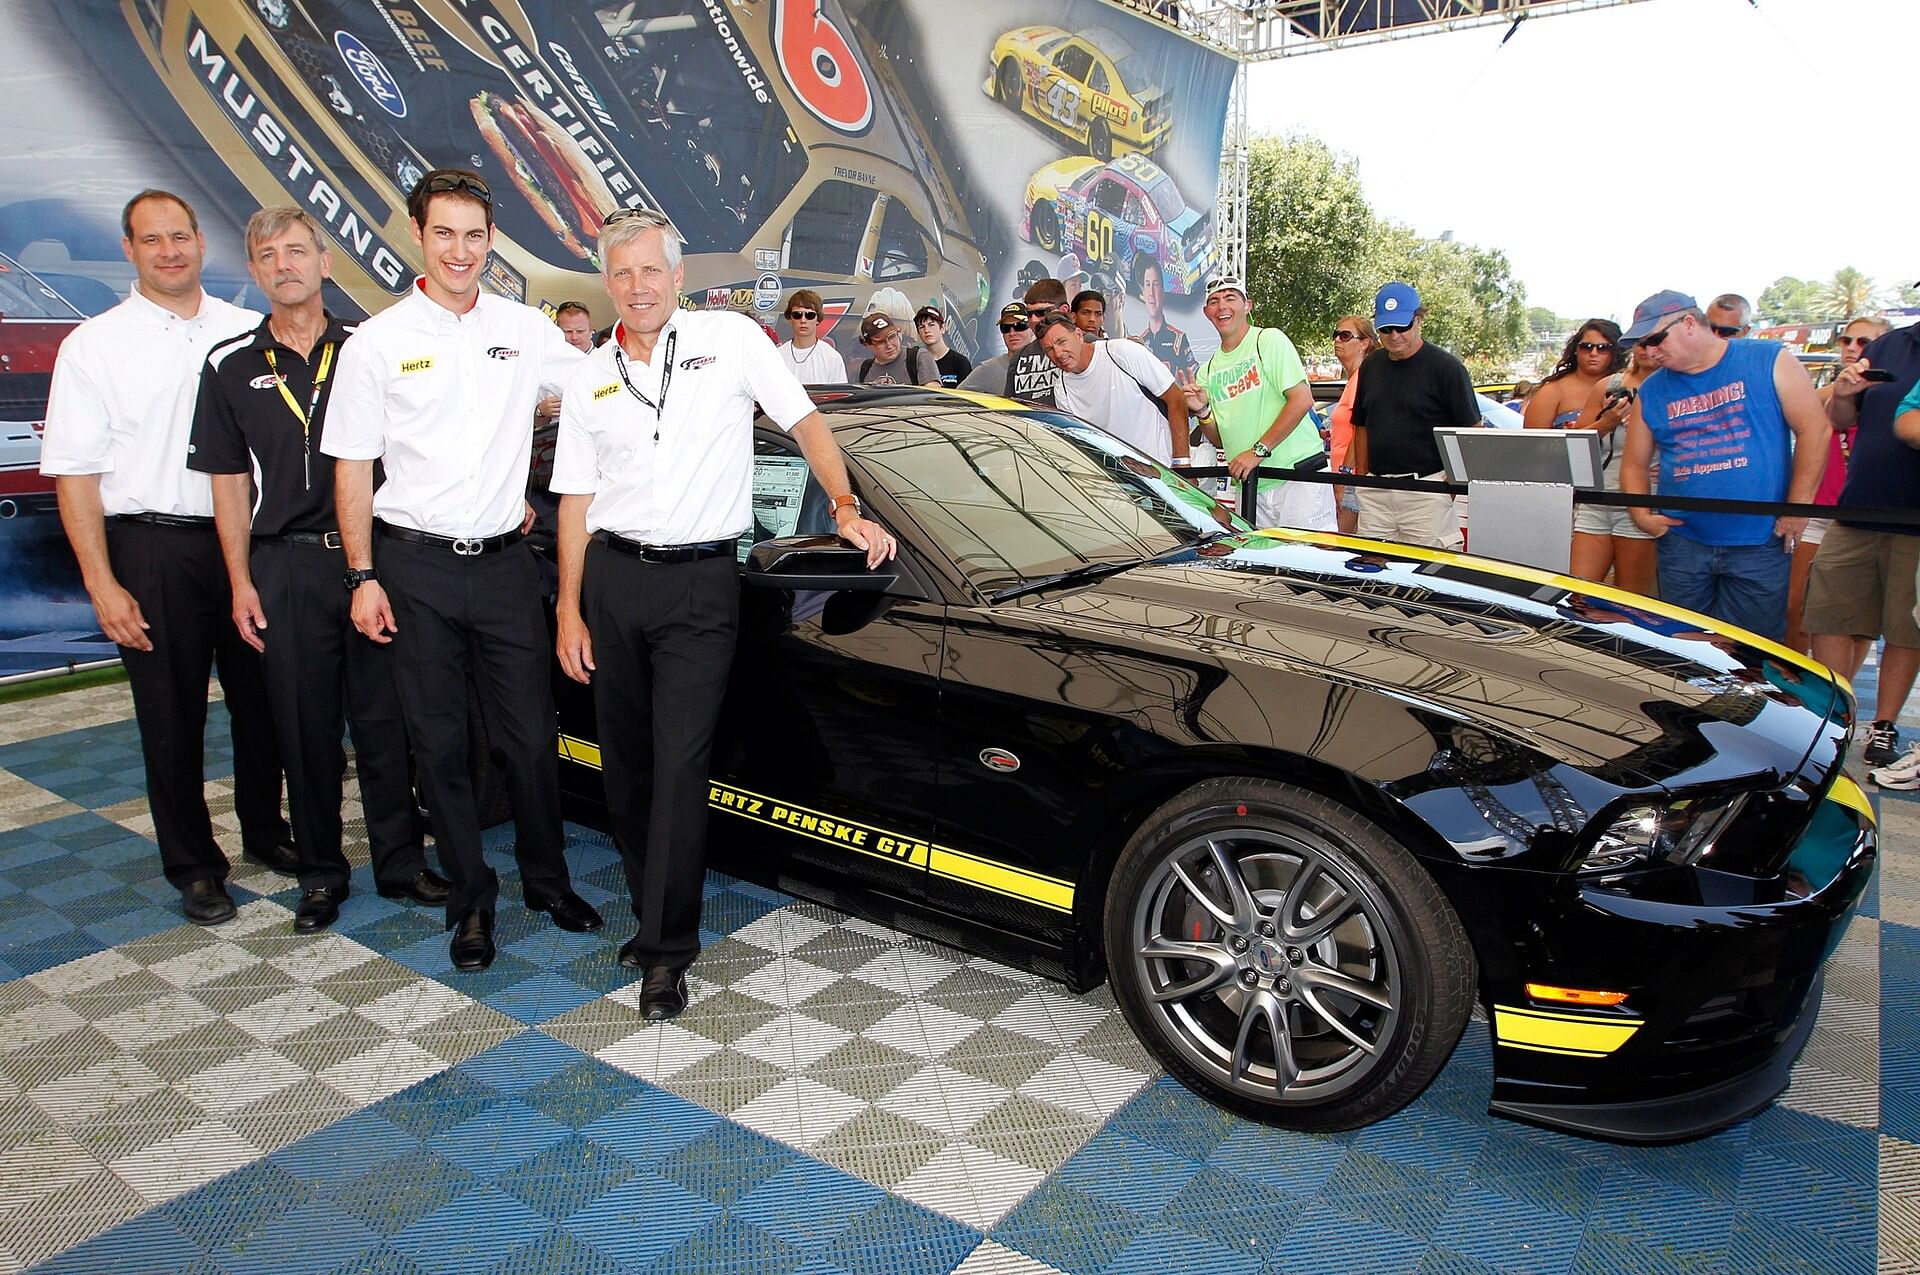 Joey Logano and his 2014 Ford Mustang Hertz-Penske GT